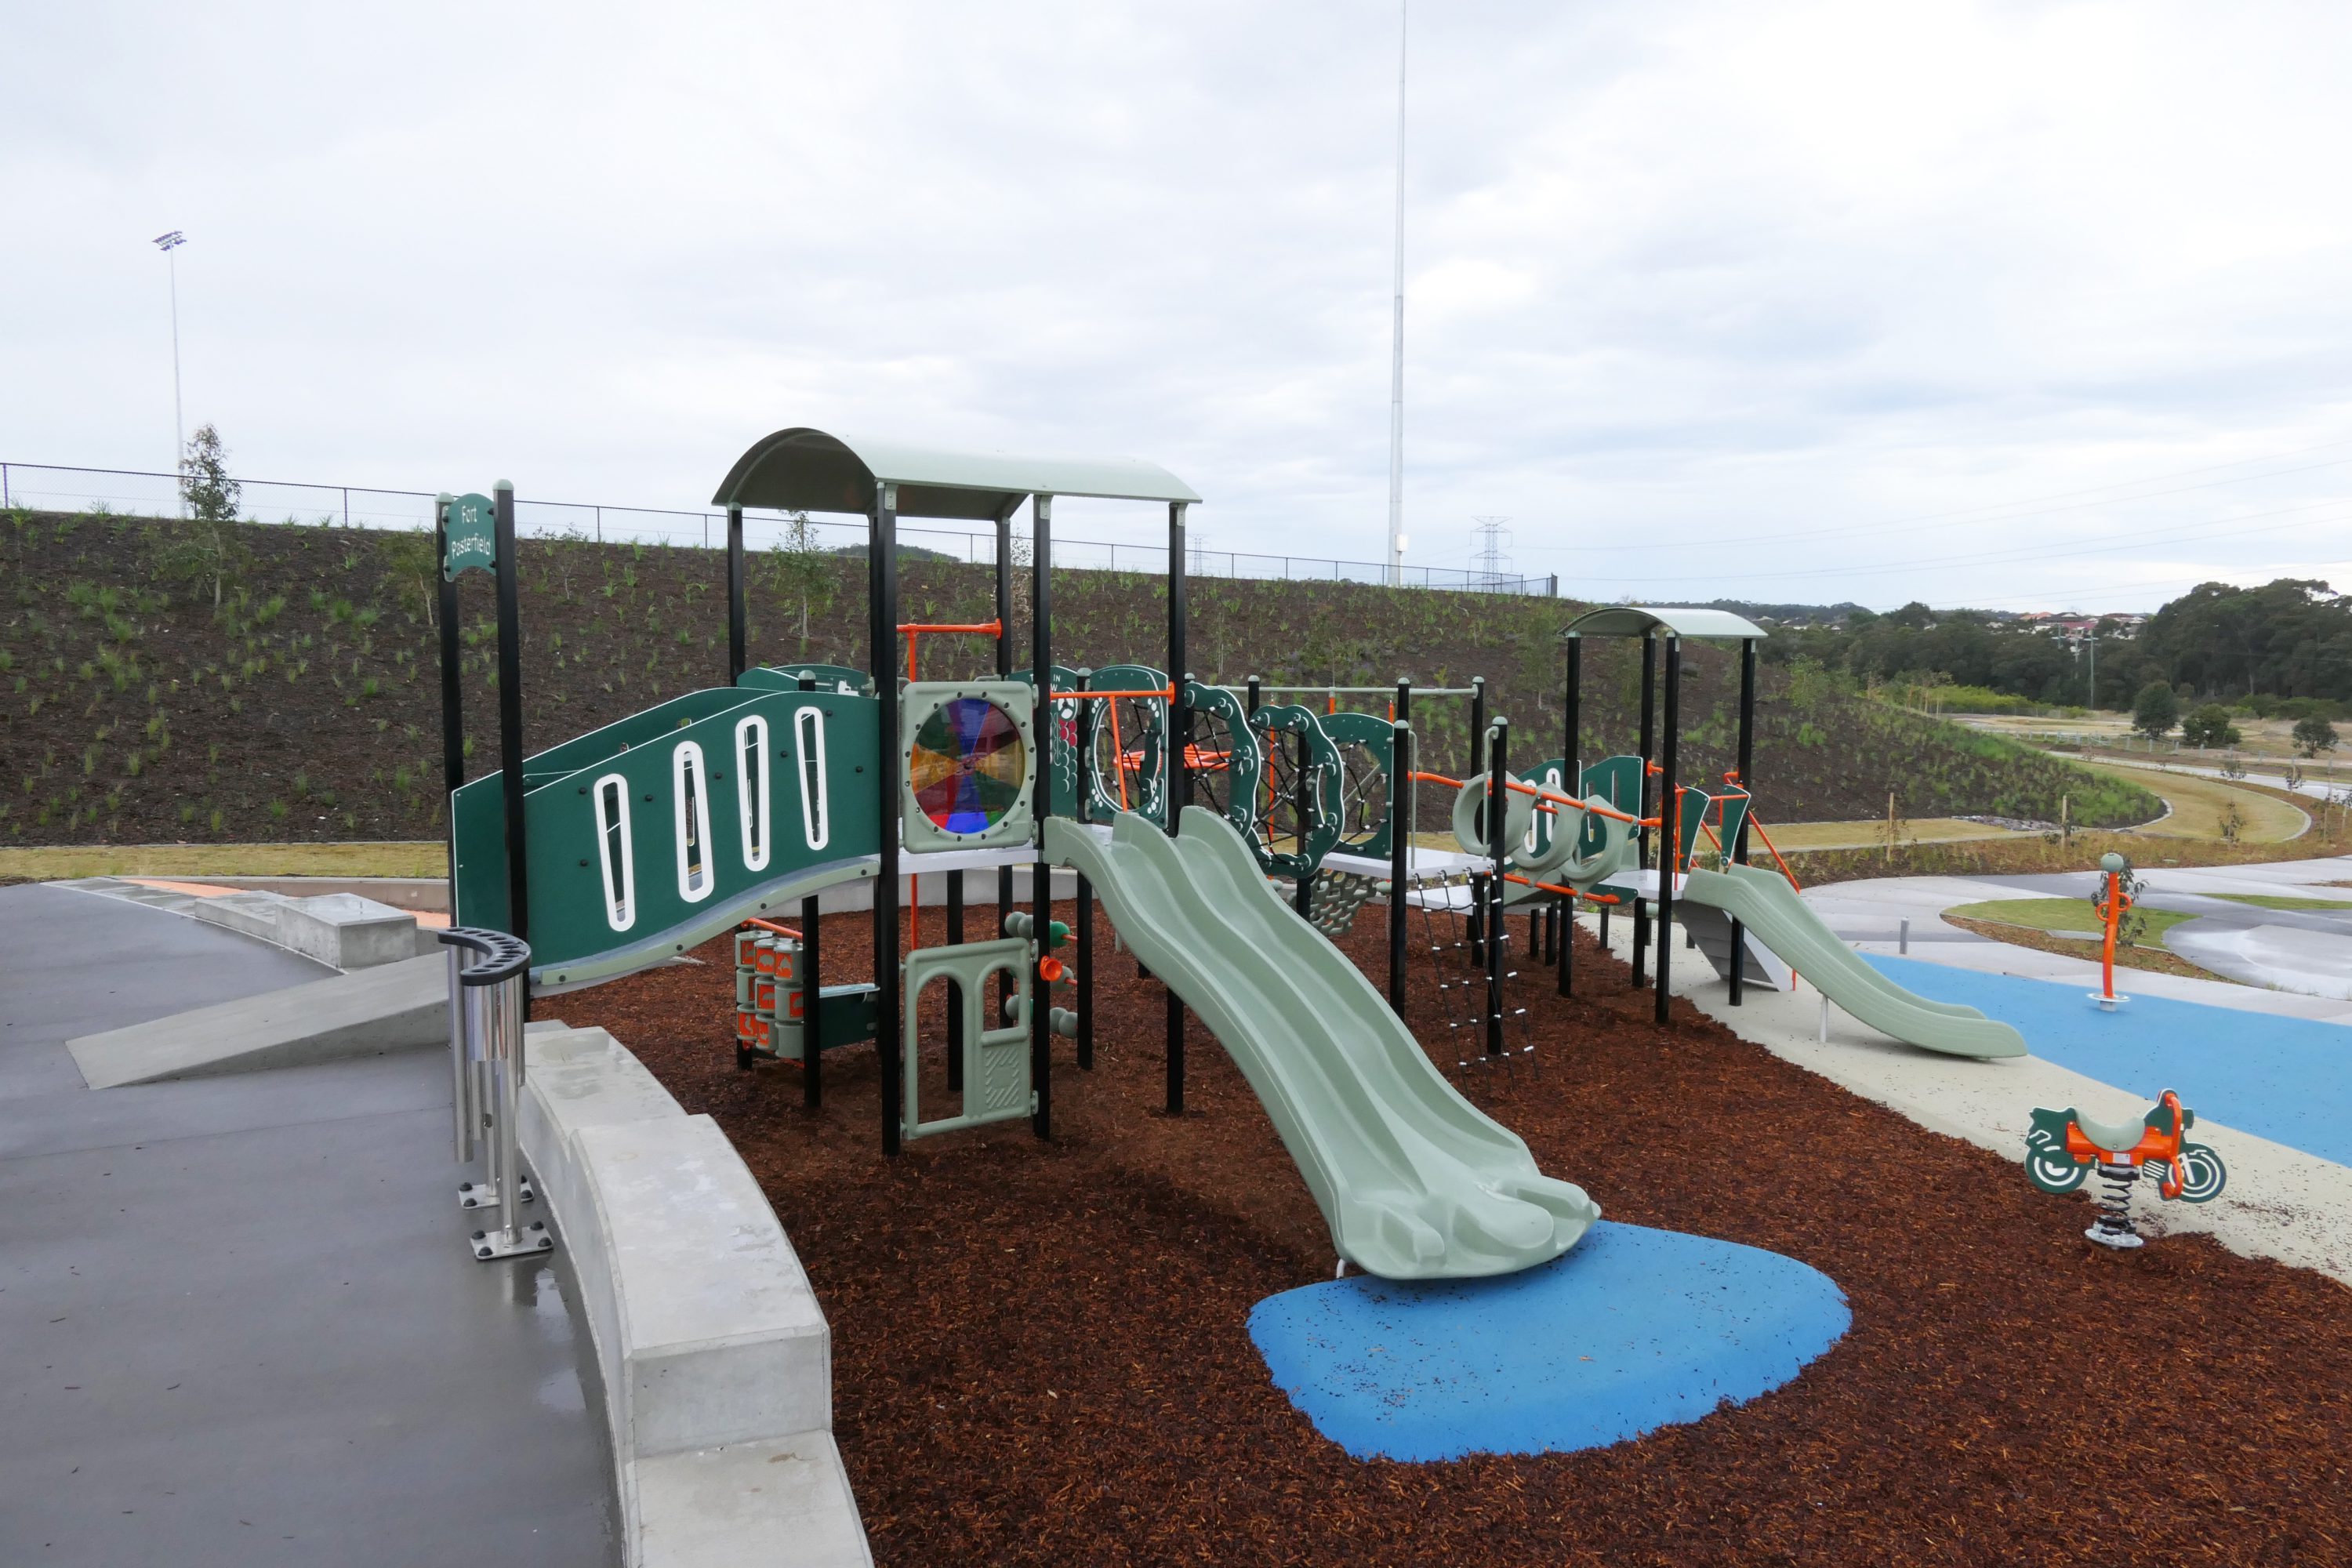 This side on view of the junior playground at Pasterfields Sports Complex shows off the 2 levels